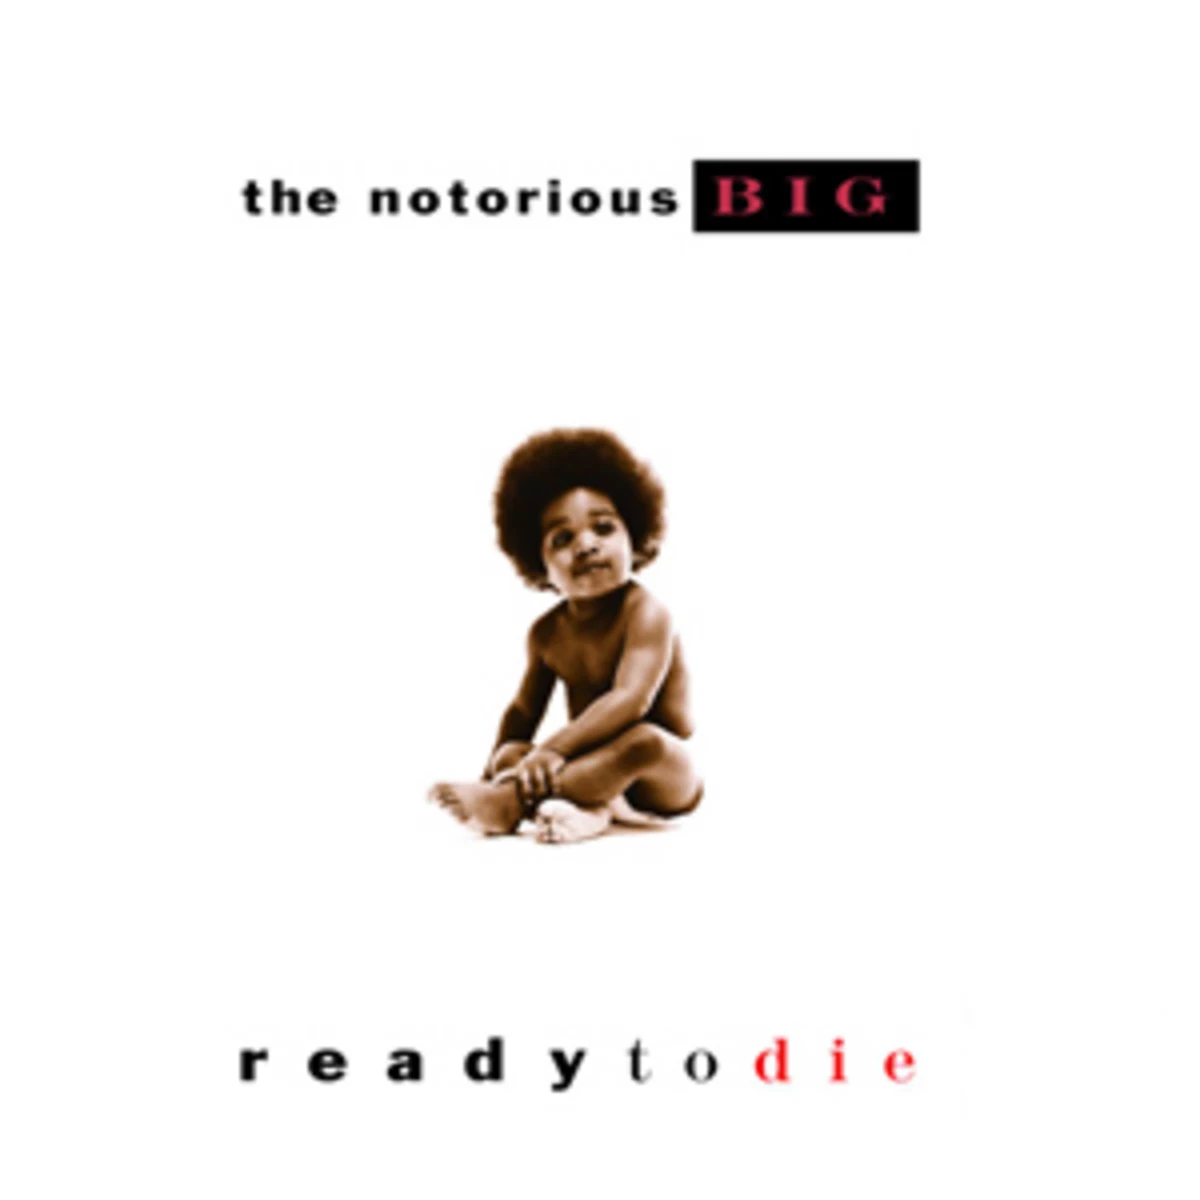 What's the most underrated Biggie Smalls track? : r/rap